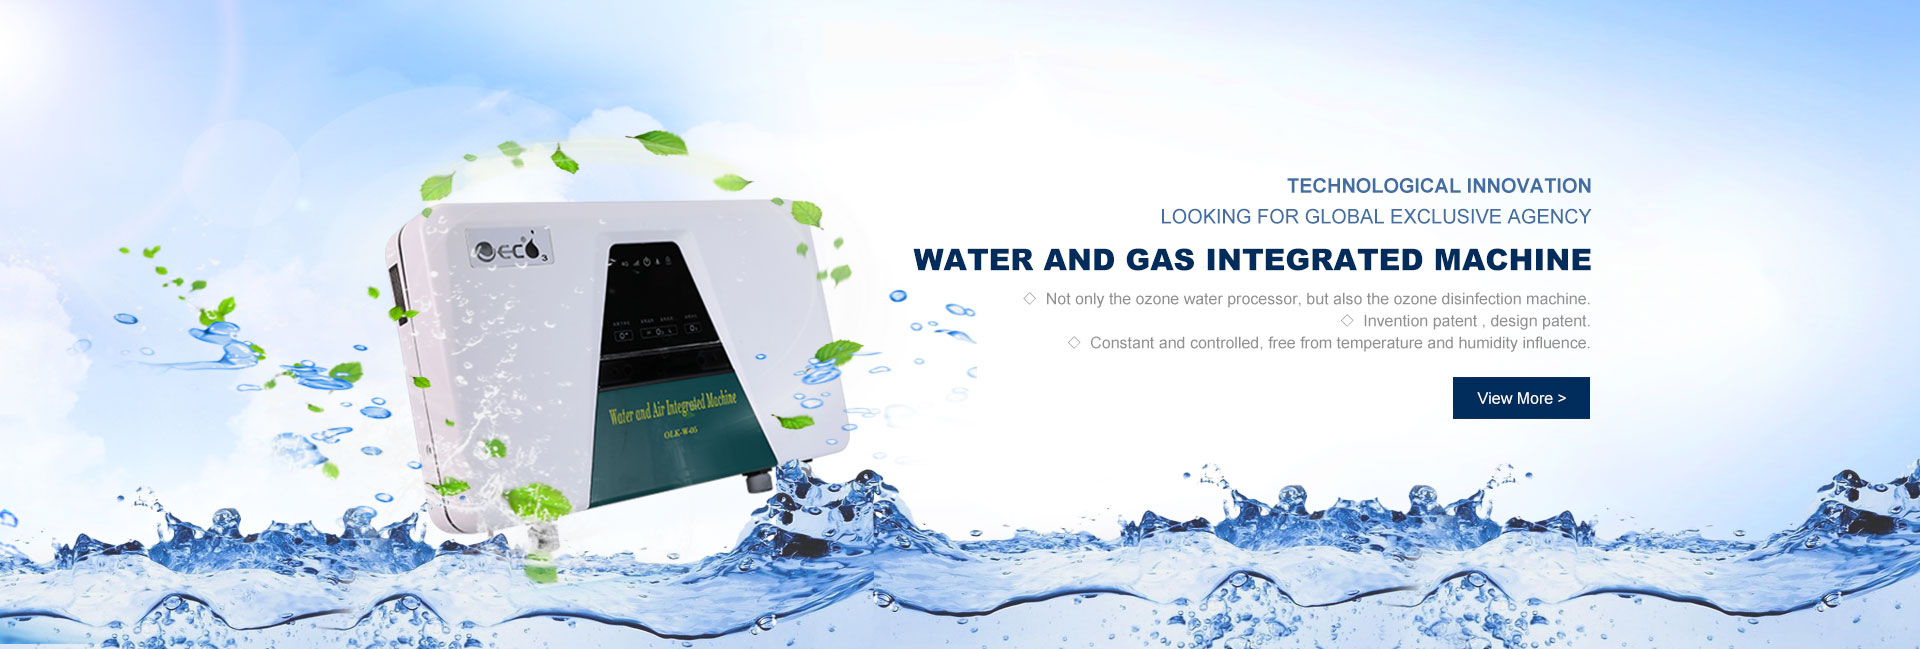 Water-and-gas-integrated-machine